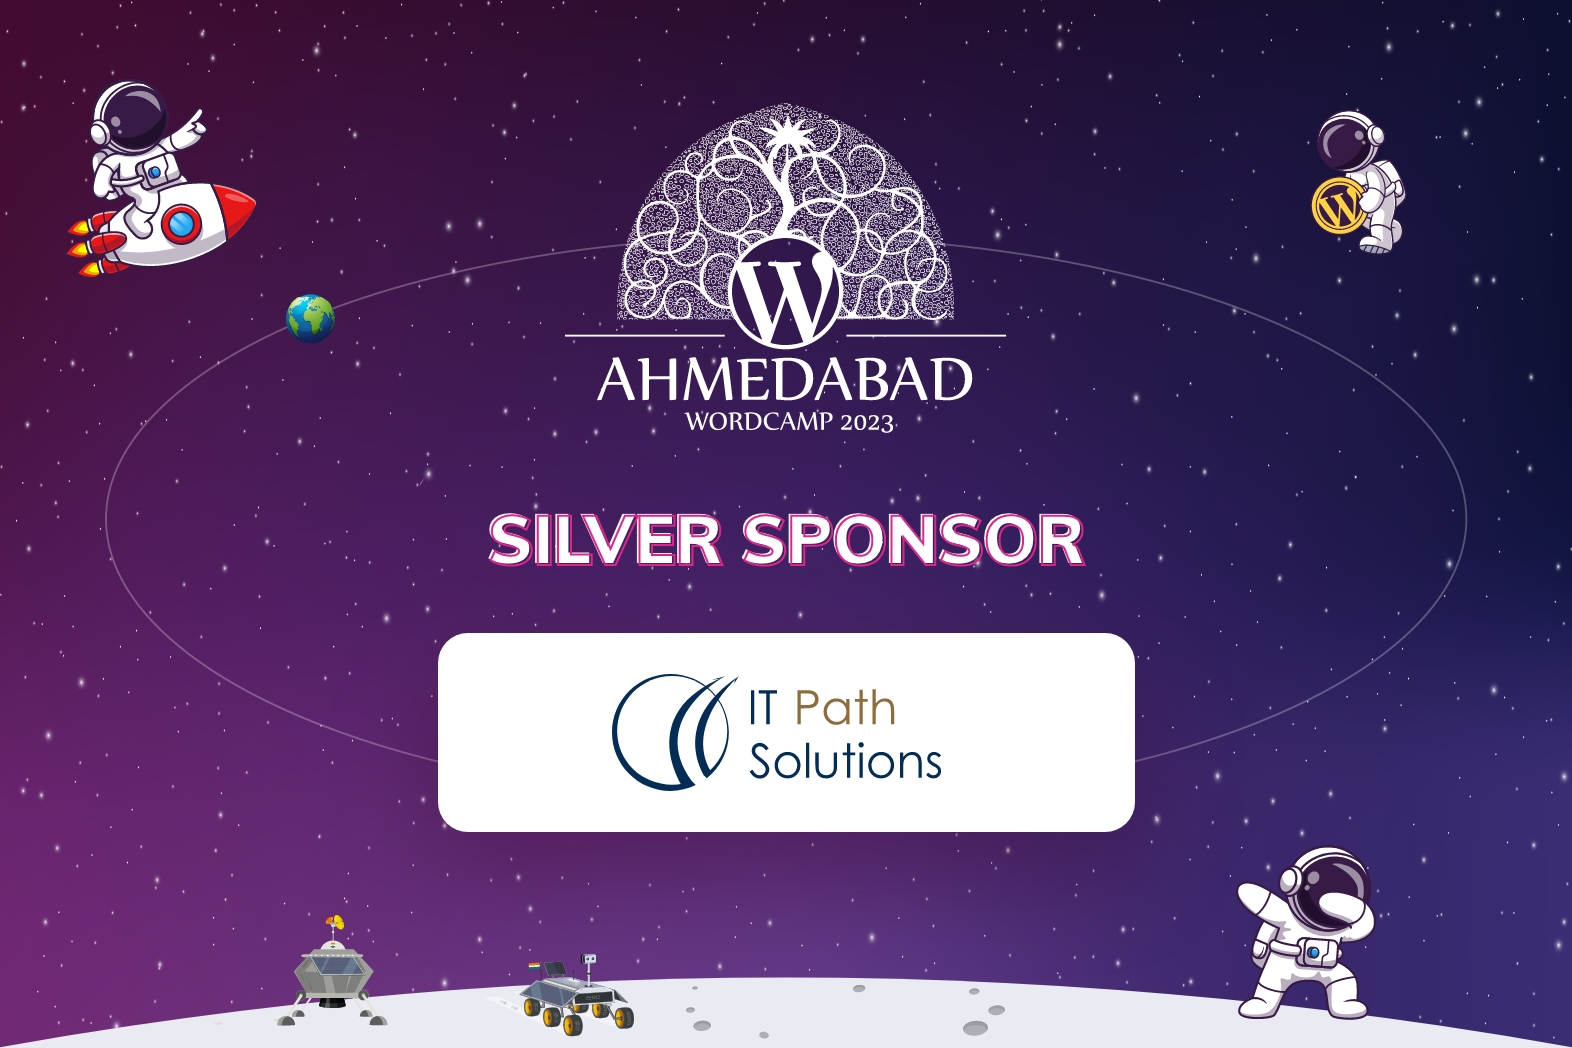 Thank You IT Path Solutions PVT. LTD., for being our Silver Sponsor